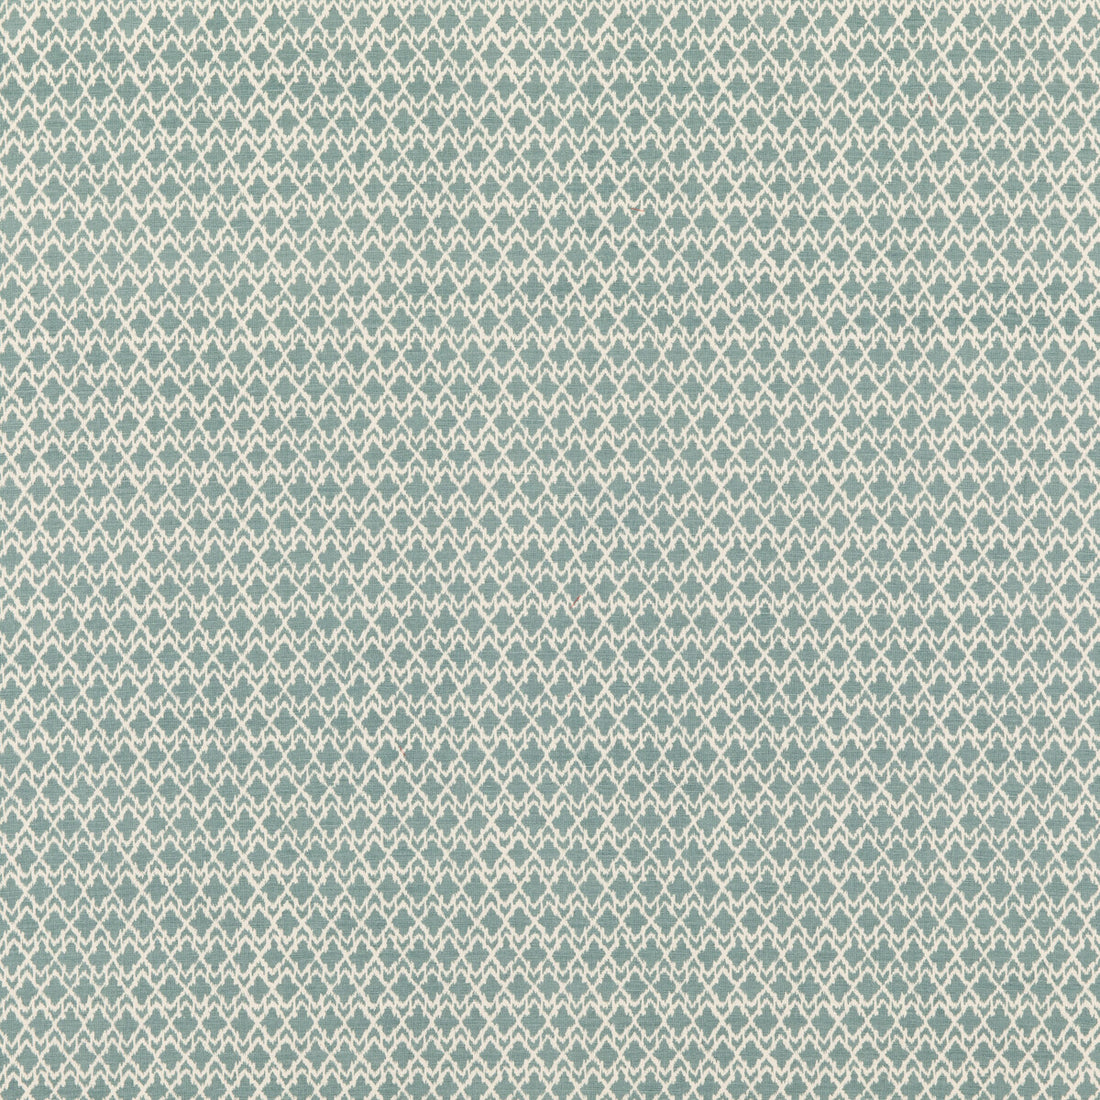 Merrin fabric in aqua color - pattern BP10889.3.0 - by G P &amp; J Baker in the Chifu collection